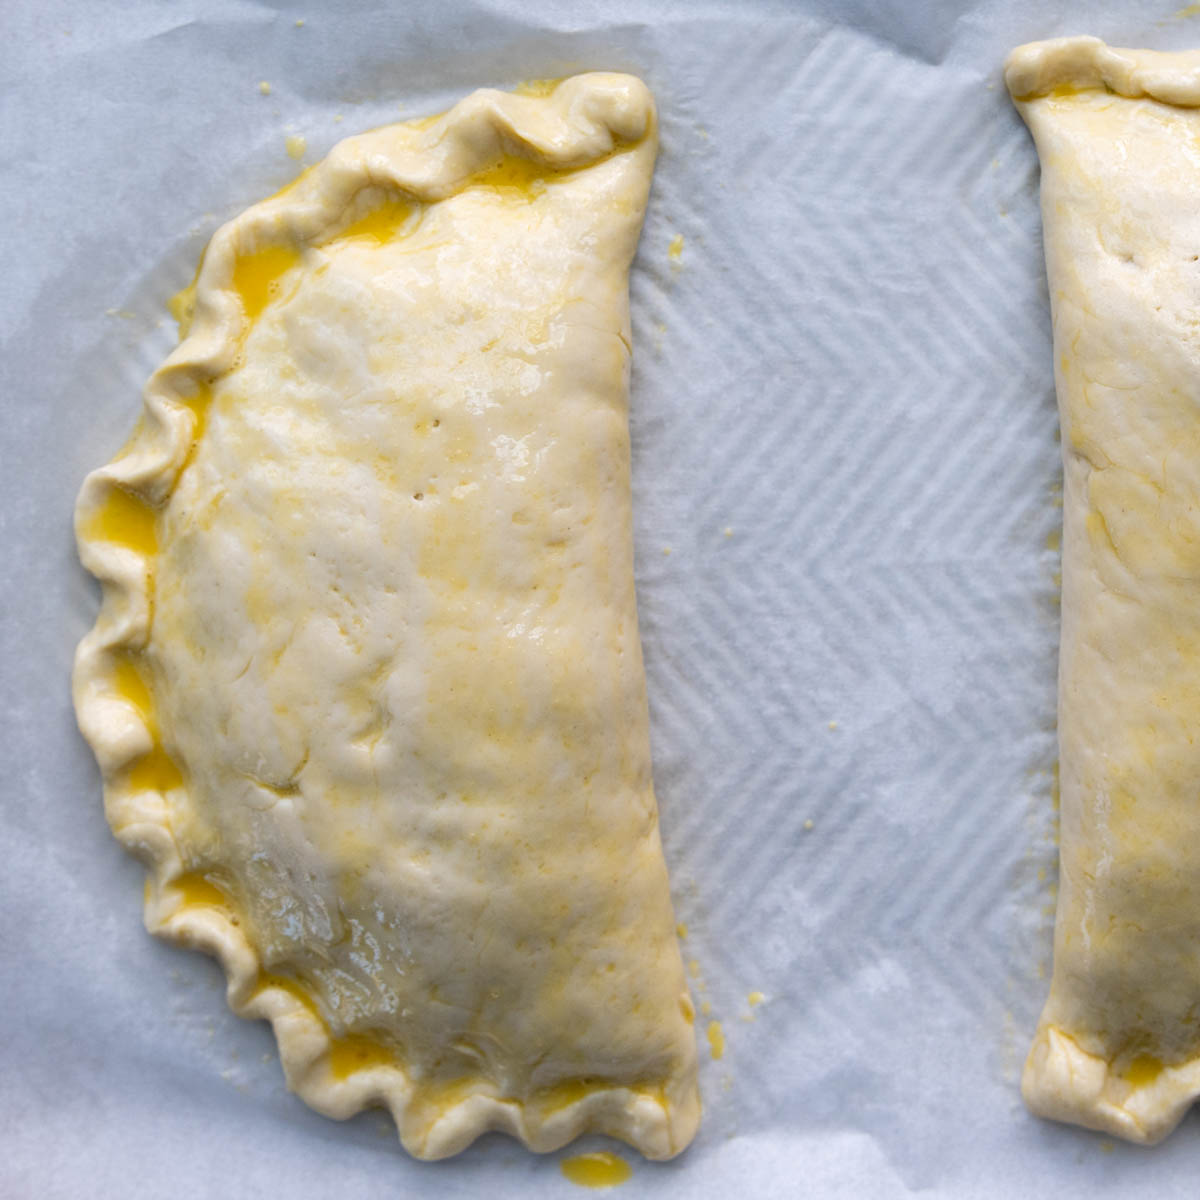 the unbaked calzones brushed with egg wash.